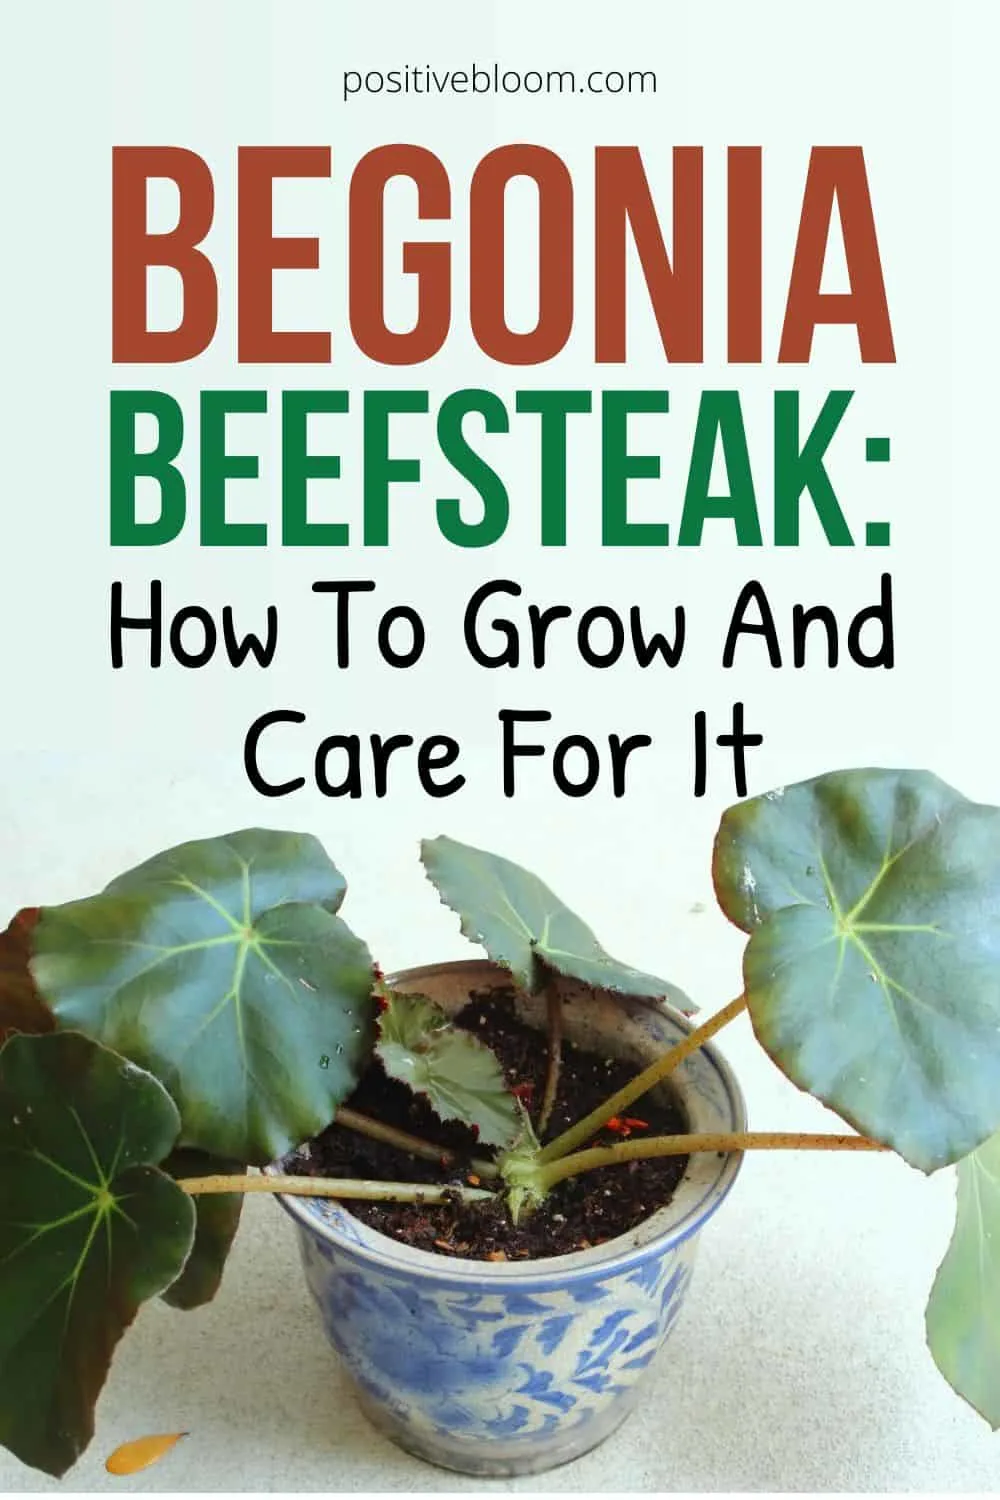 Begonia Beefsteak How To Grow And Care For It Pinterest